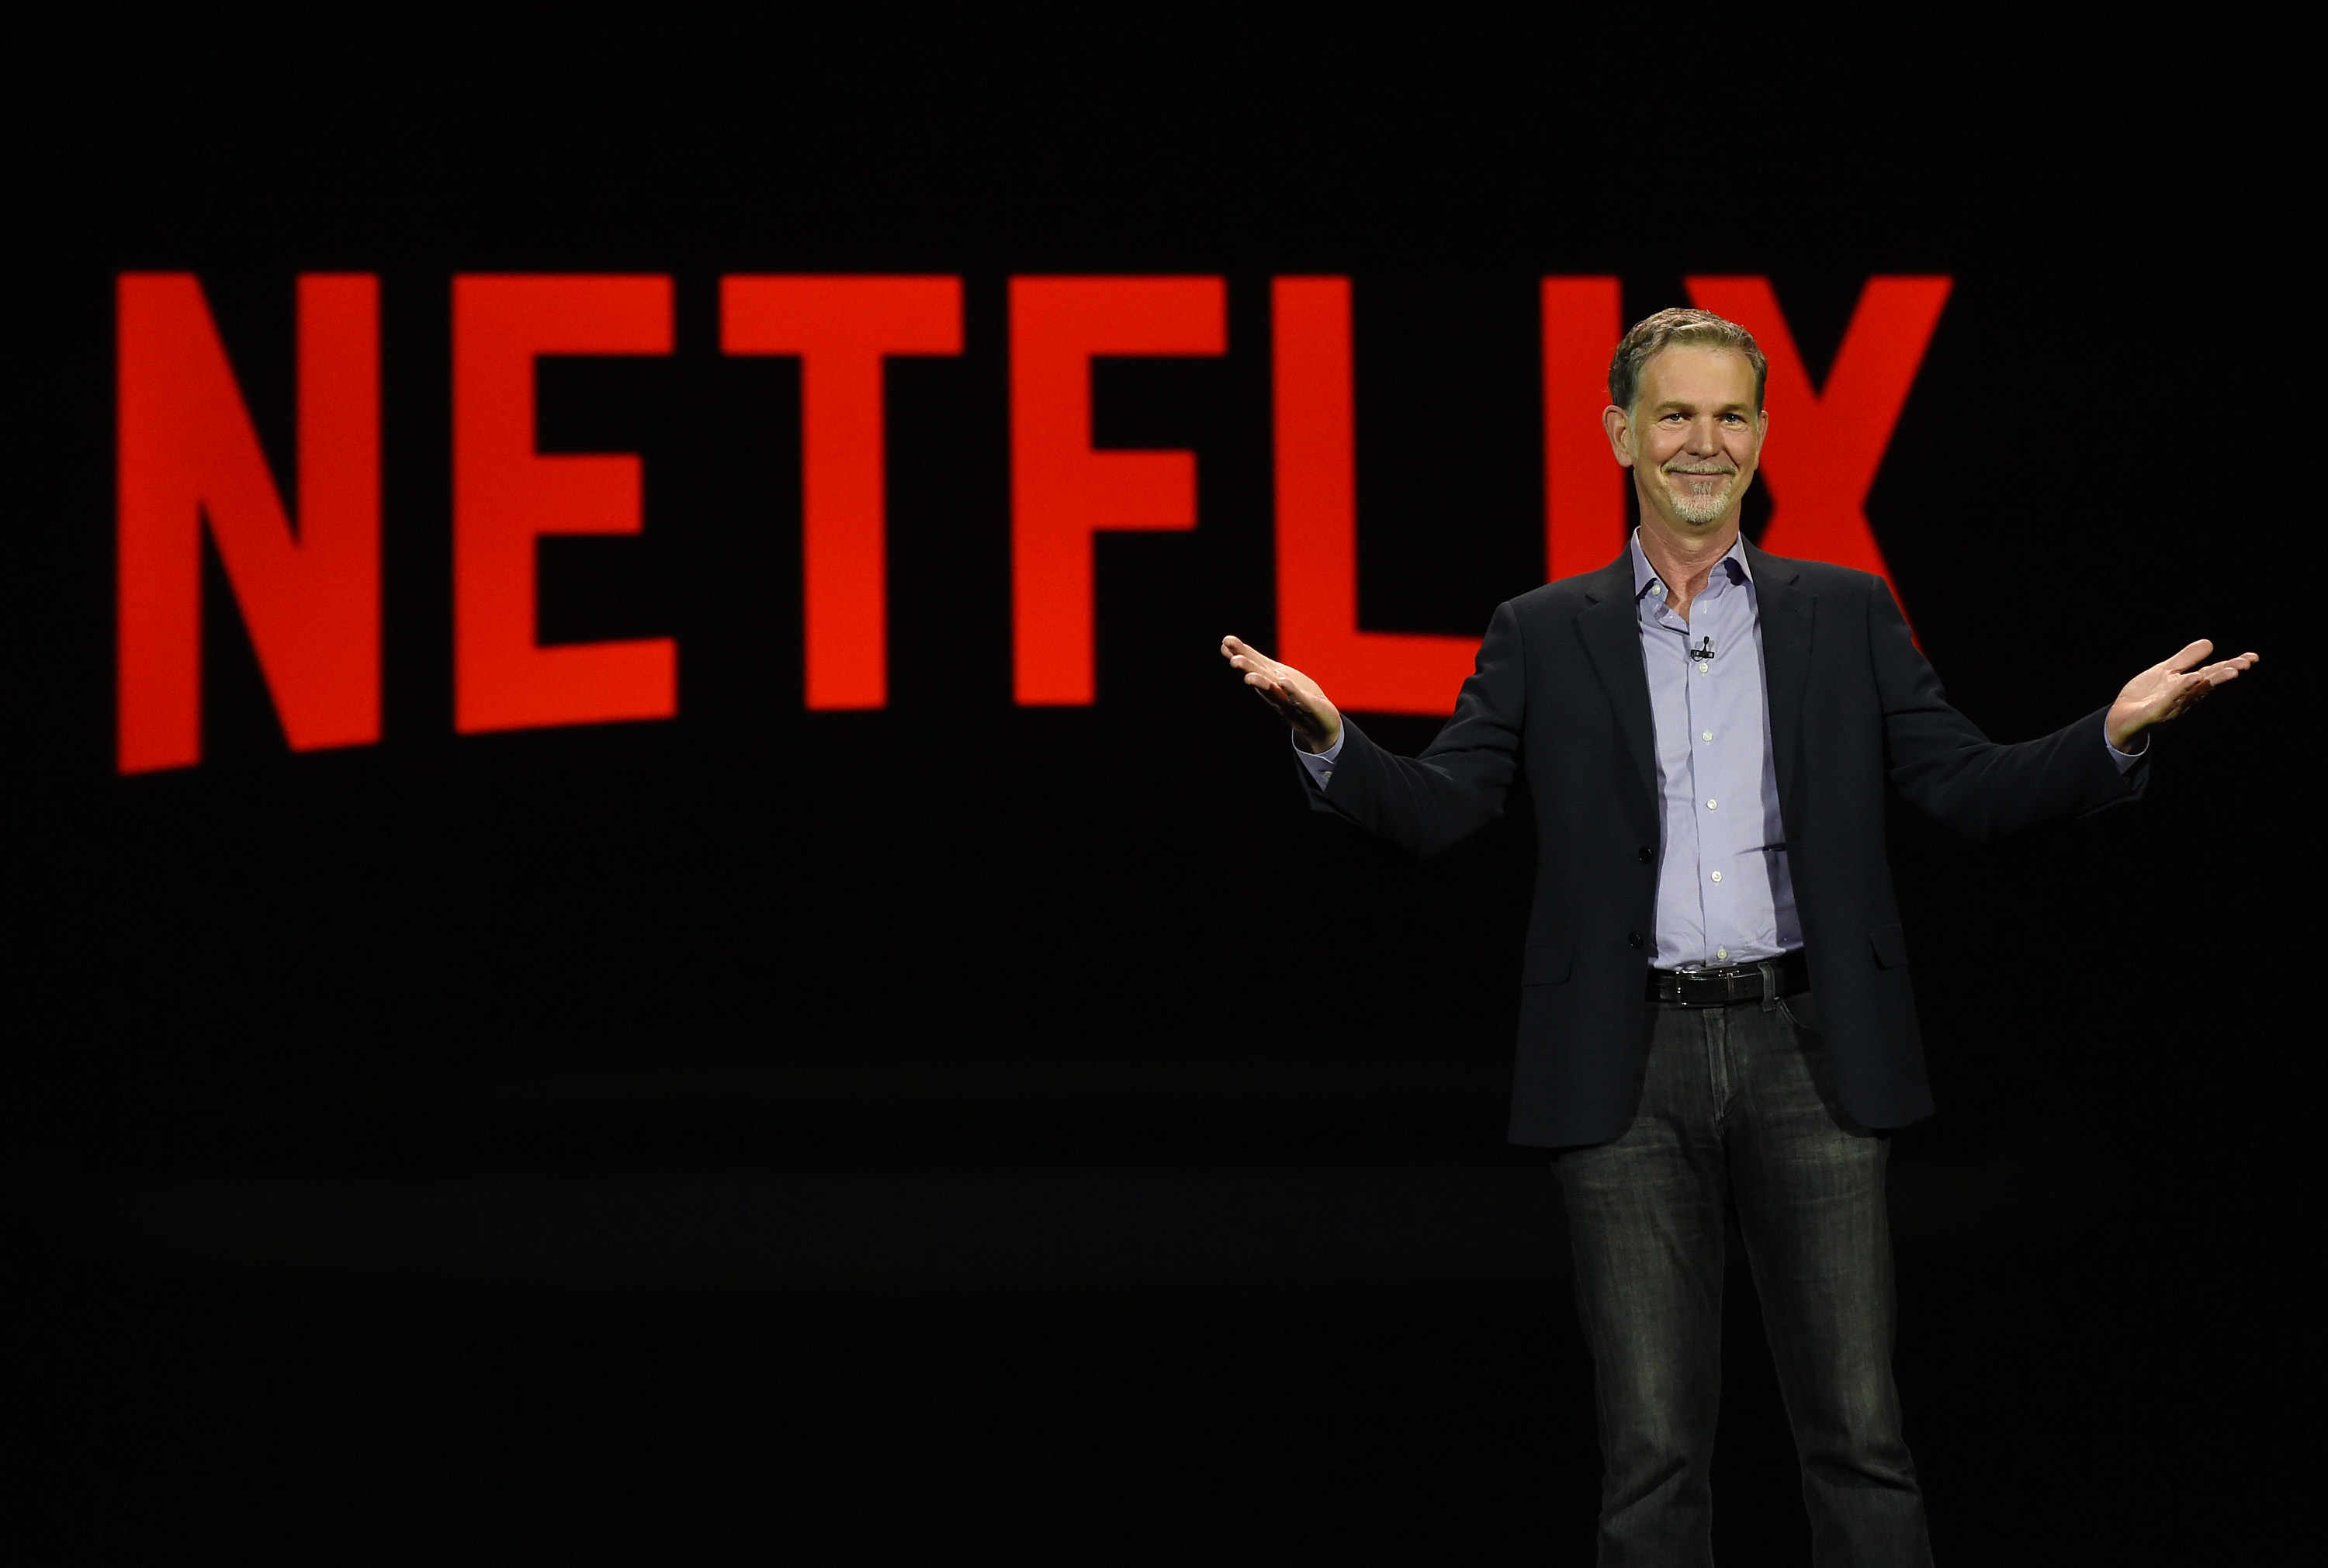 Netflix will look for a repeat play in 2018 after a strong year